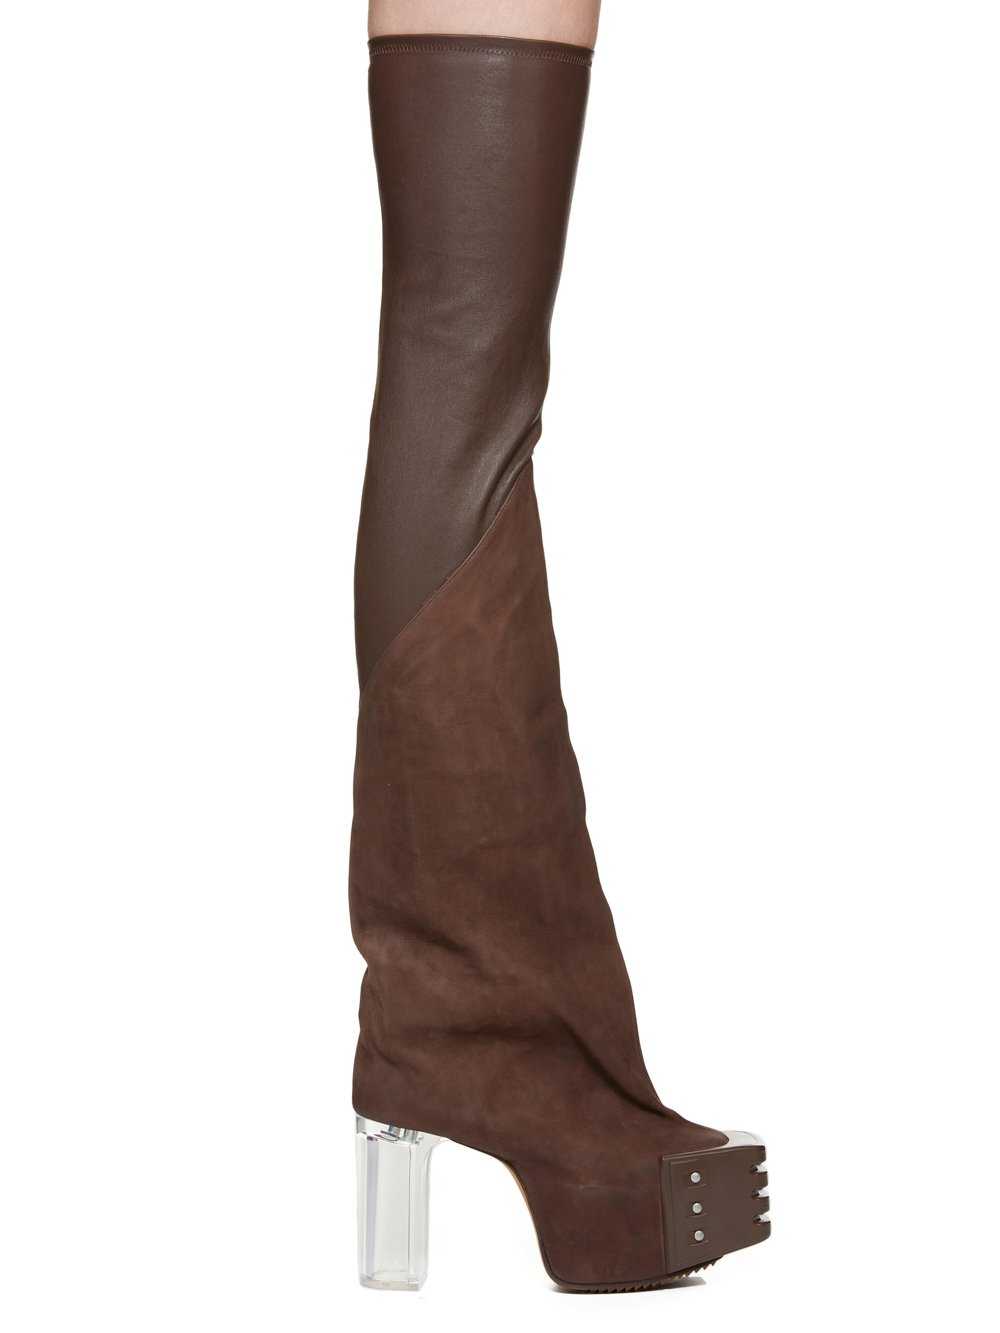 RICK OWENS FW23 LUXOR RUNWAY FLARED PLATFORMS 45 IN BROWN STRETCH LAMB LEATHER AND GREYWOLF NUBUCK